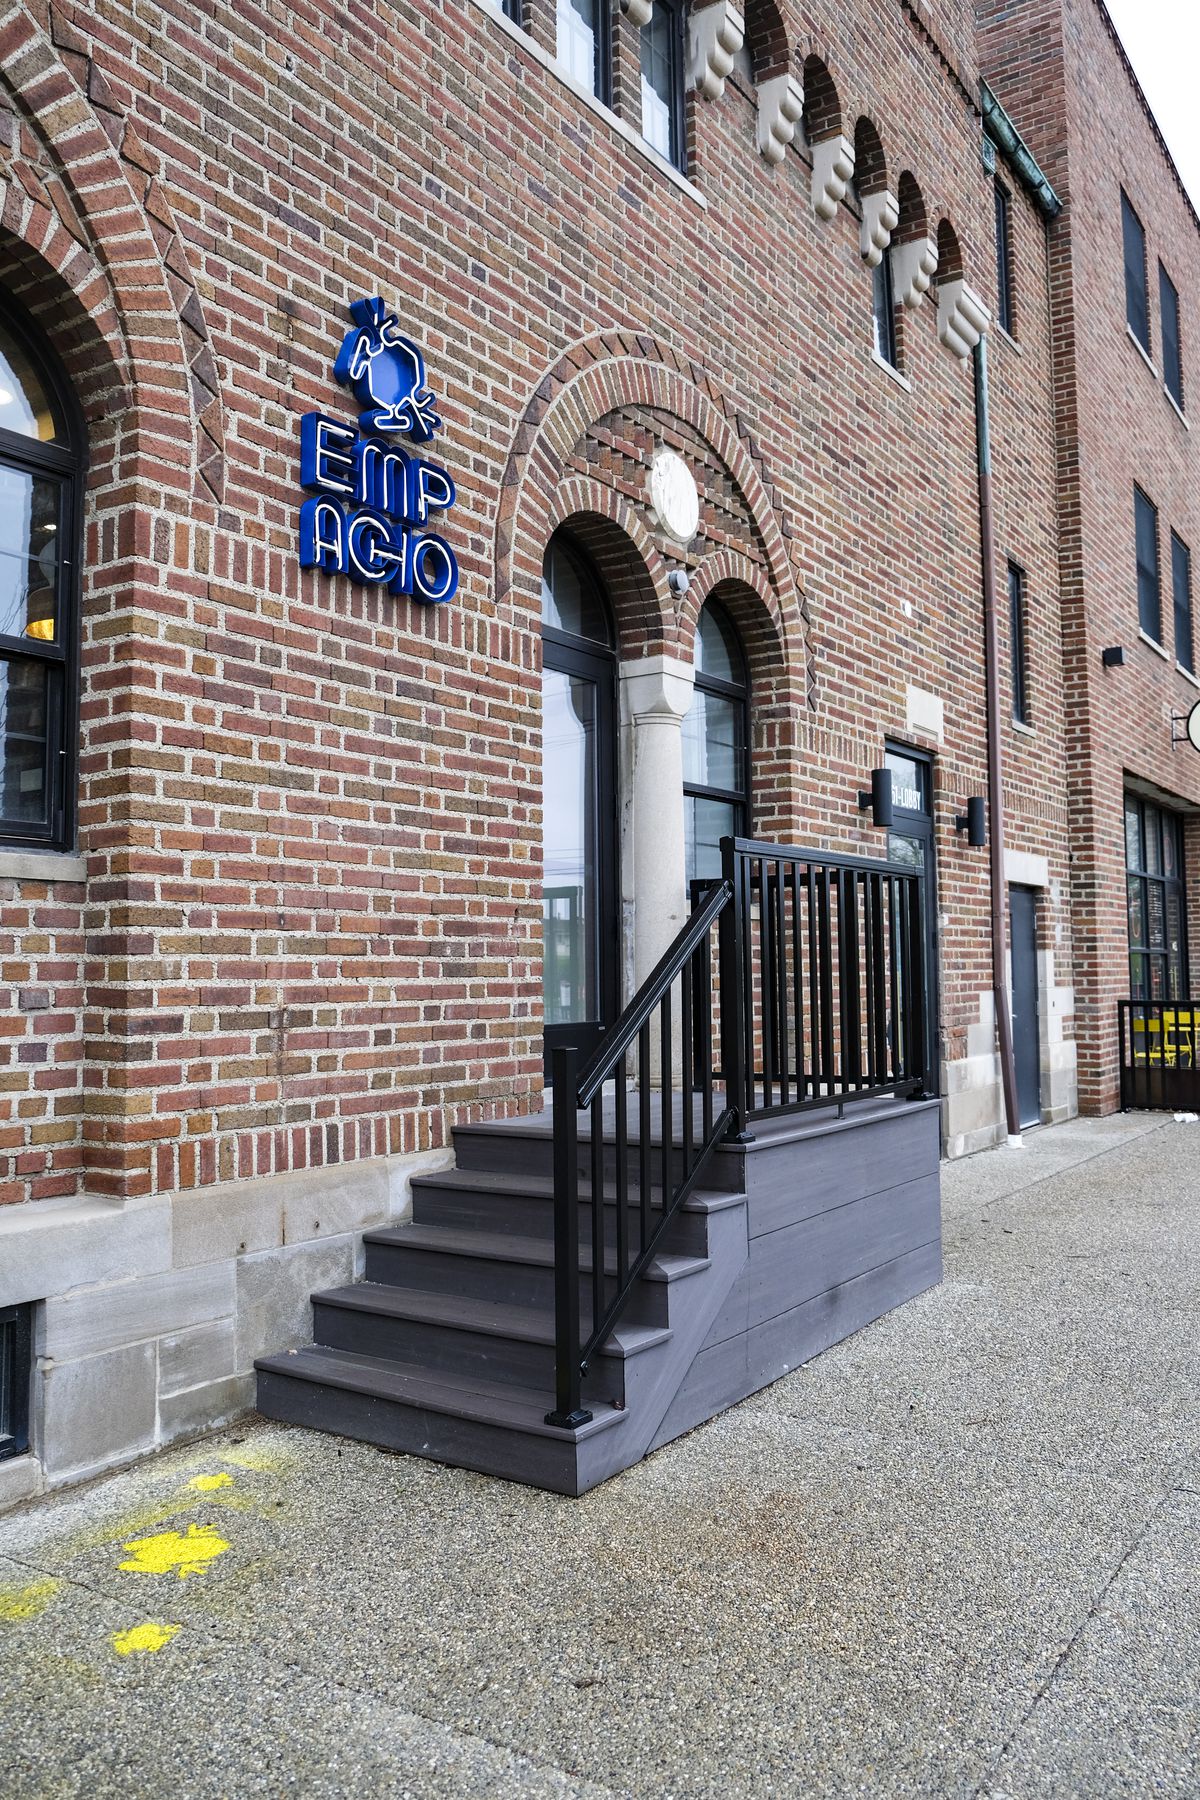 A brick building with a blue sign that says Empacho and features a blue frog, steps, railing, arched doorways at Empacho in Detroit, Michigan.